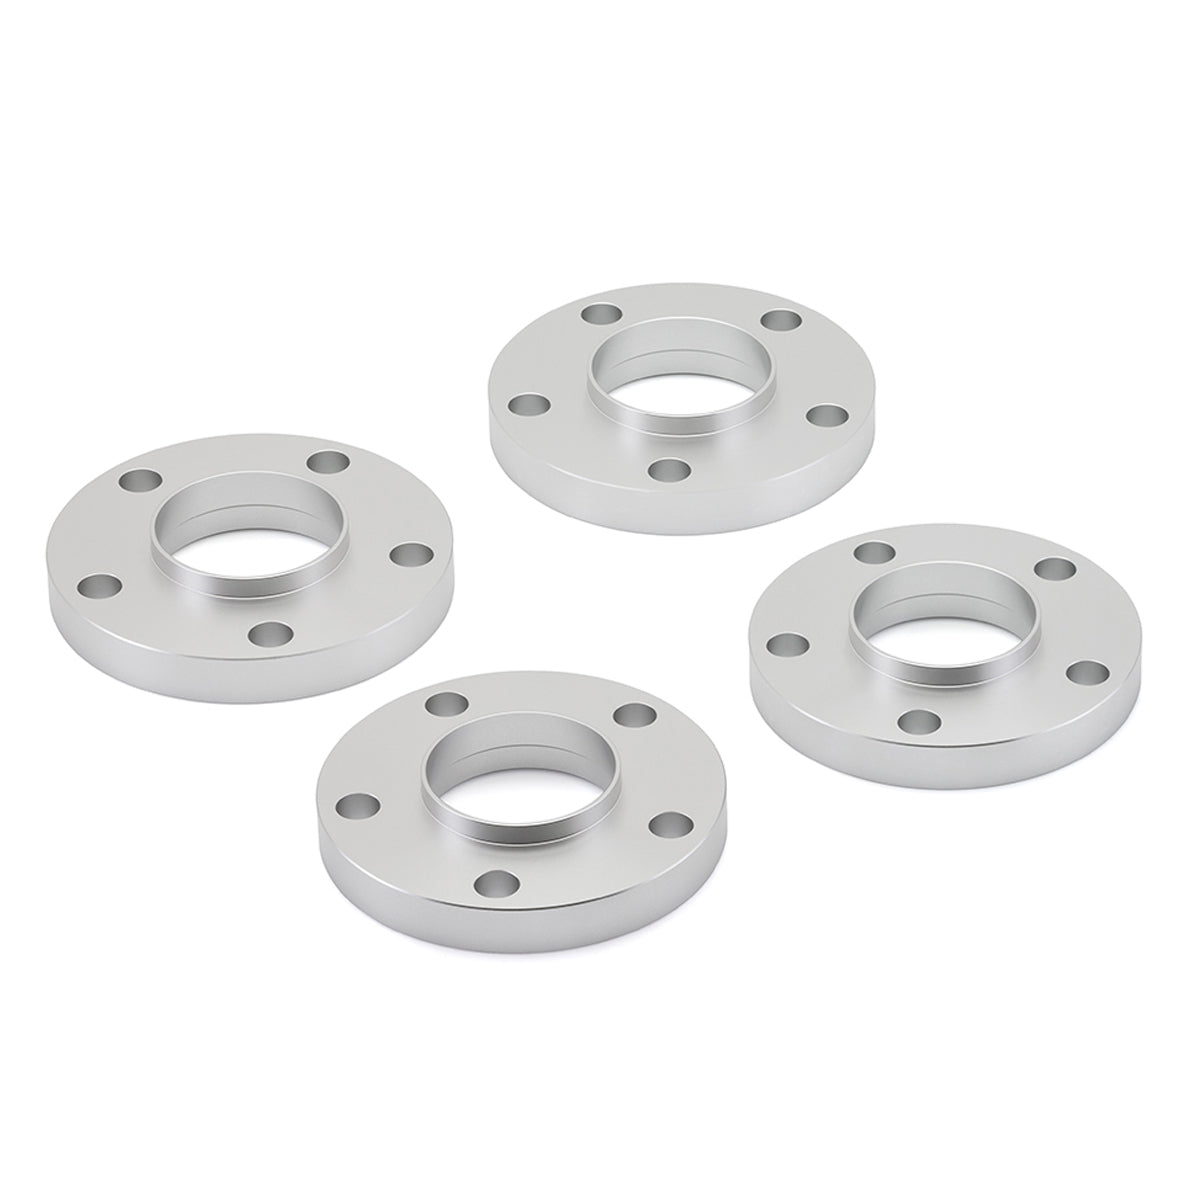 2013-2018 BMW 4 Series F32 F33 5x120 Hubcentric Wheelcentric Wheel Spacers set of 4